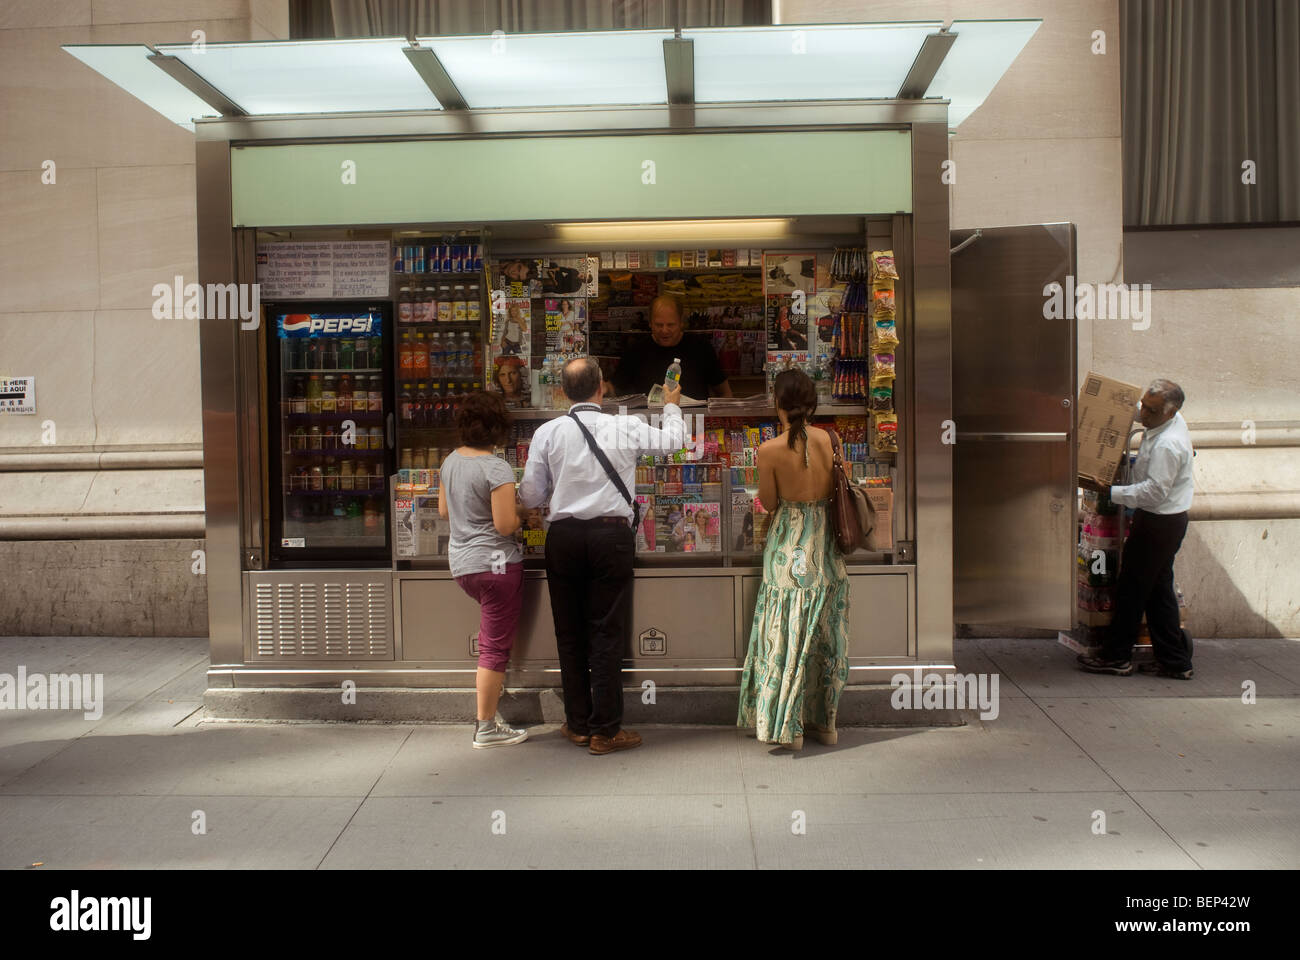 A brand new Cemusa news stand in Wall Street in the Financial District in New York Stock Photo